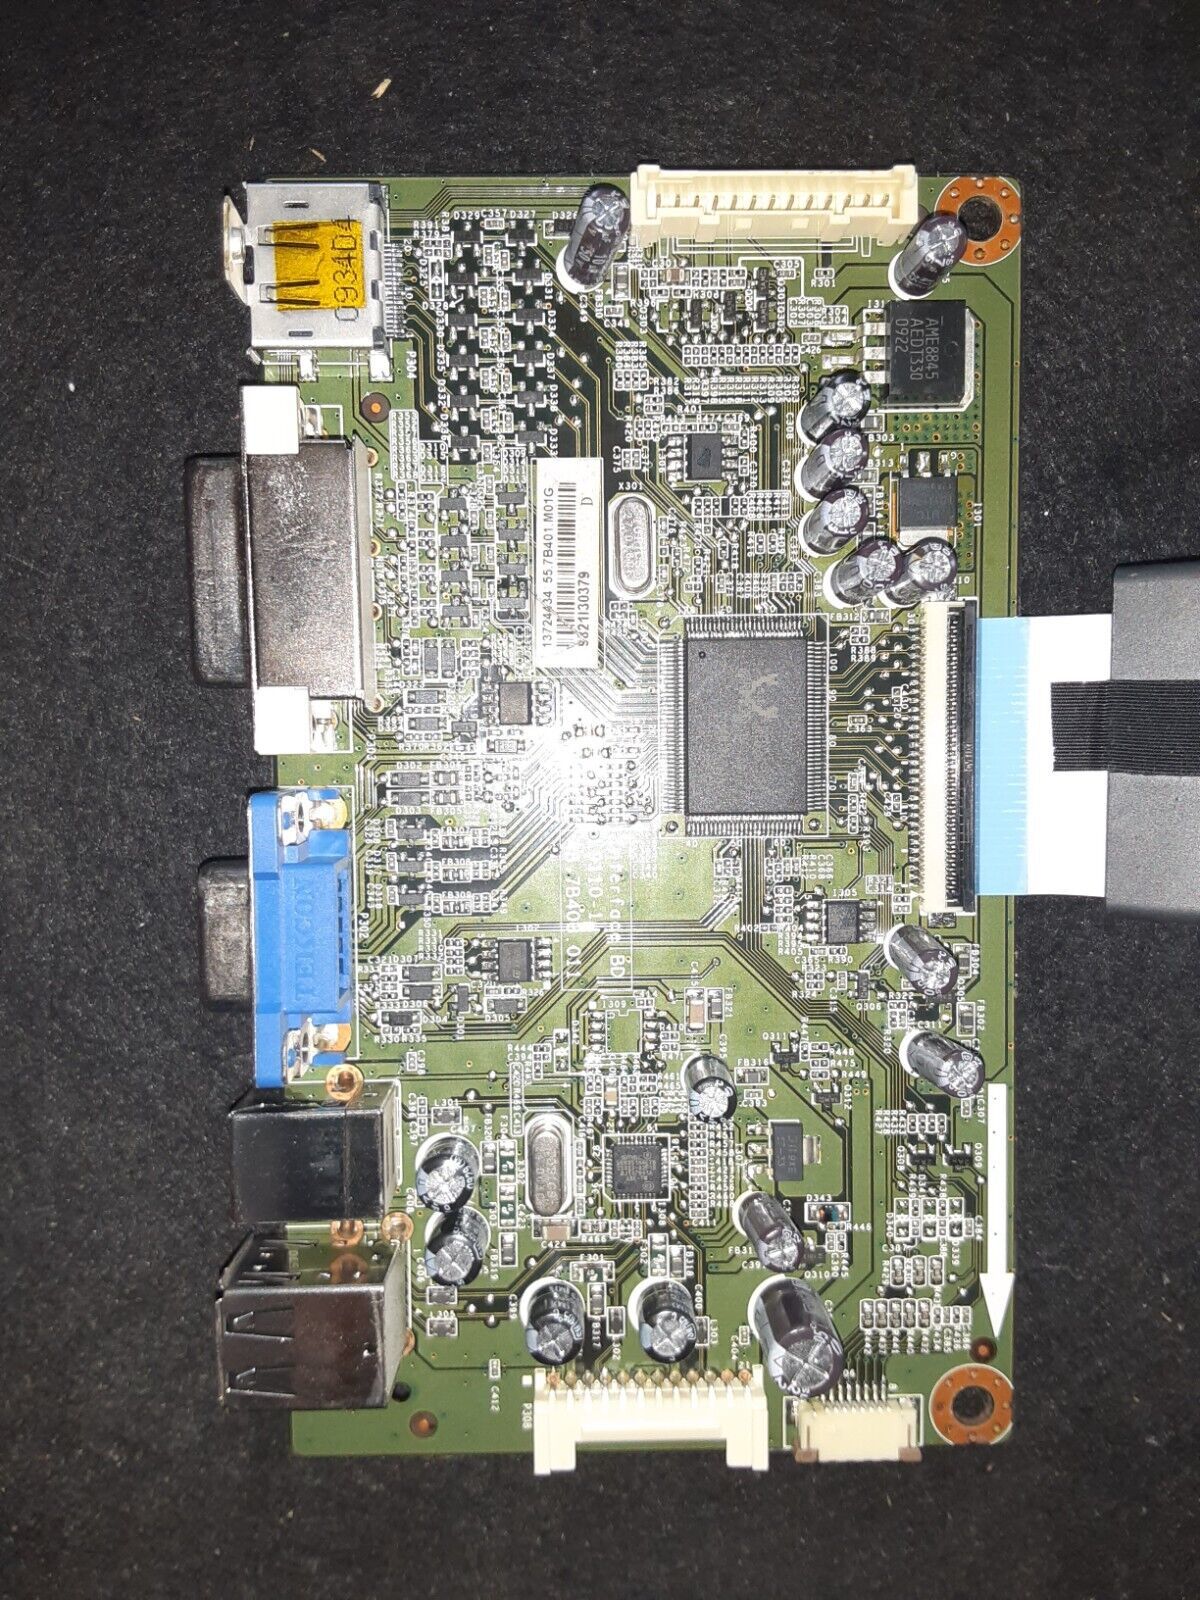 Primary image for Video board Model 55.7B401.001G from Dell Model P2010Ht